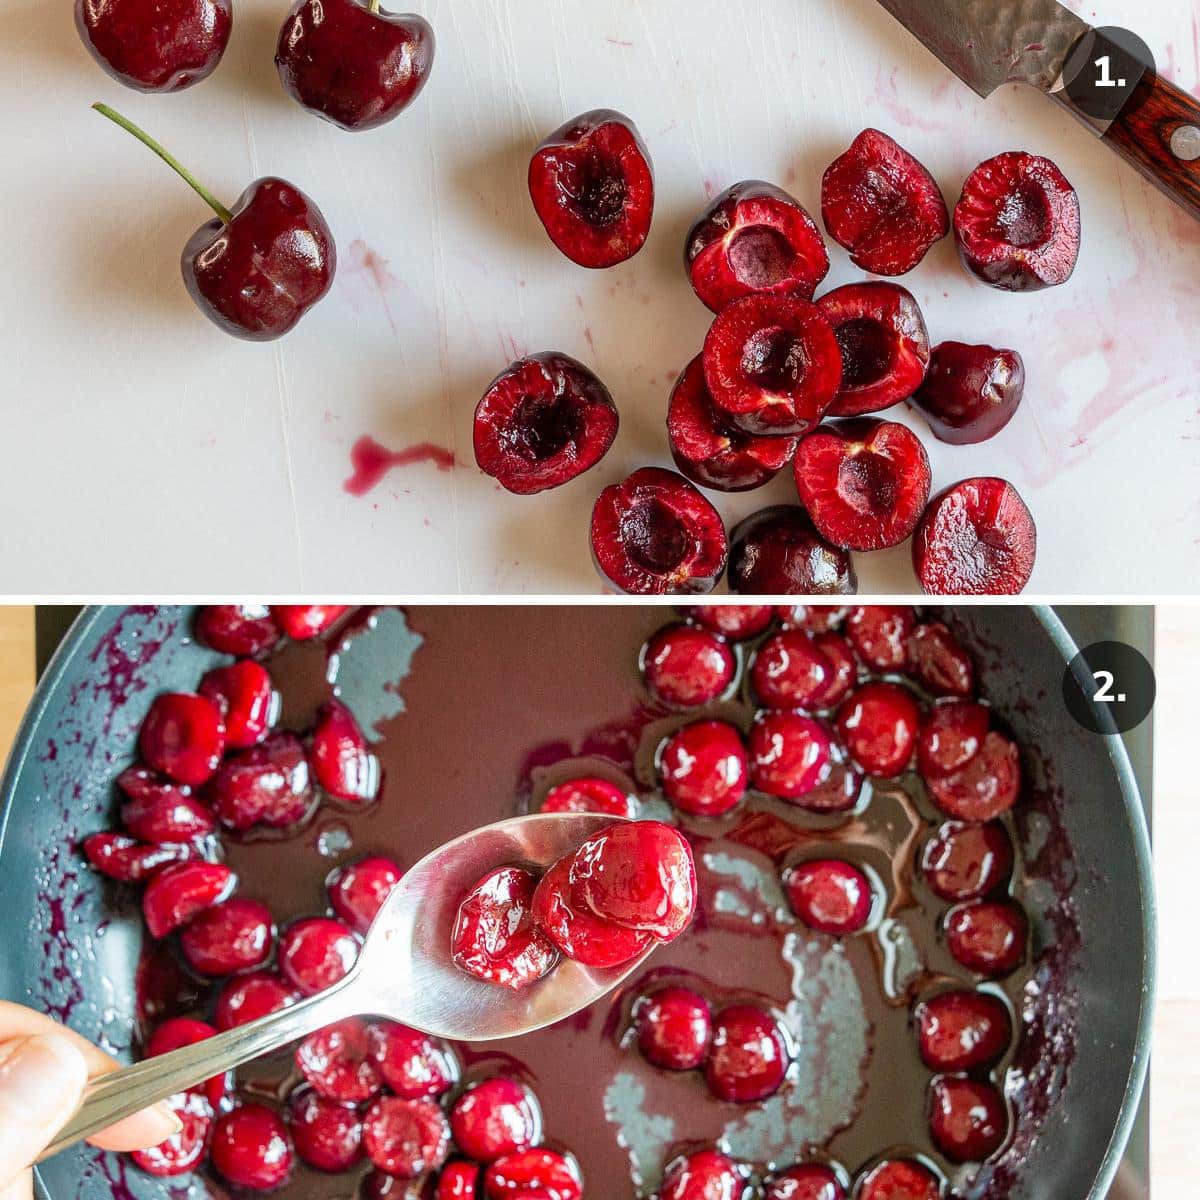 Pitting the cherries and making the boozy cherry compote.